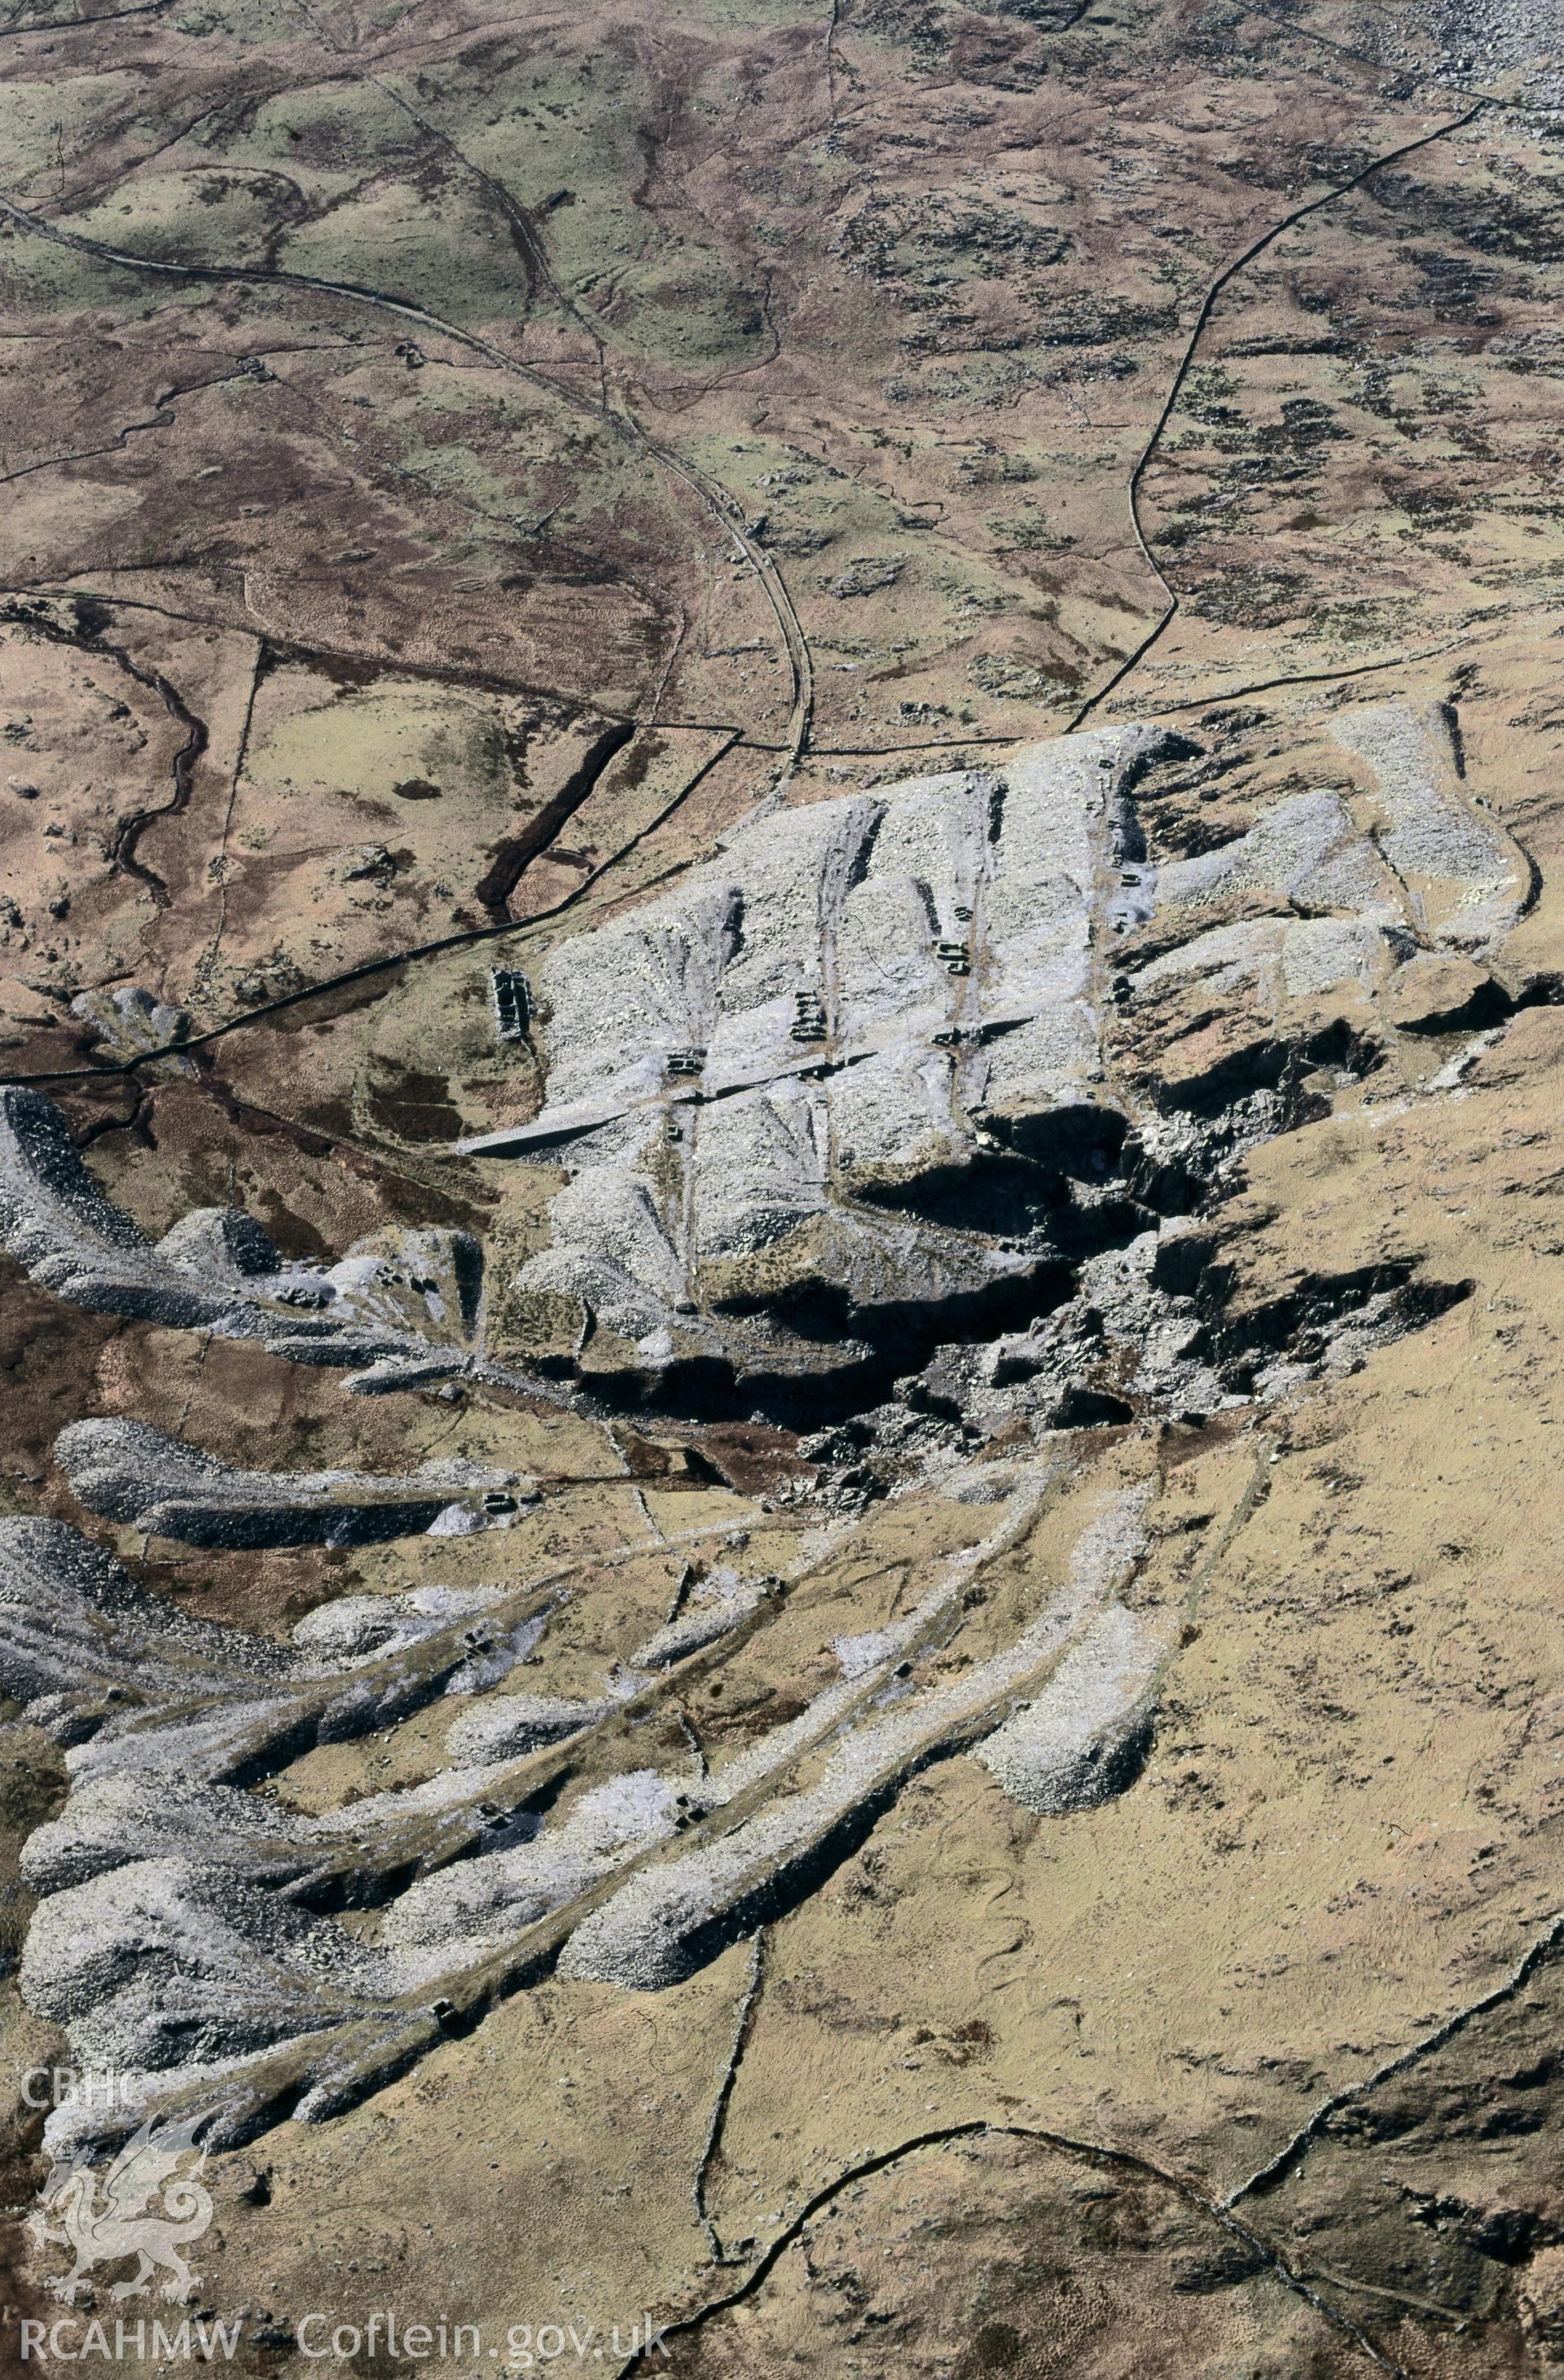 RCAHMW colour slide oblique aerial photograph of Gorseddau Slate Quarry, Dolbenmaen, taken by C.R.Musson on the 30/03/1996